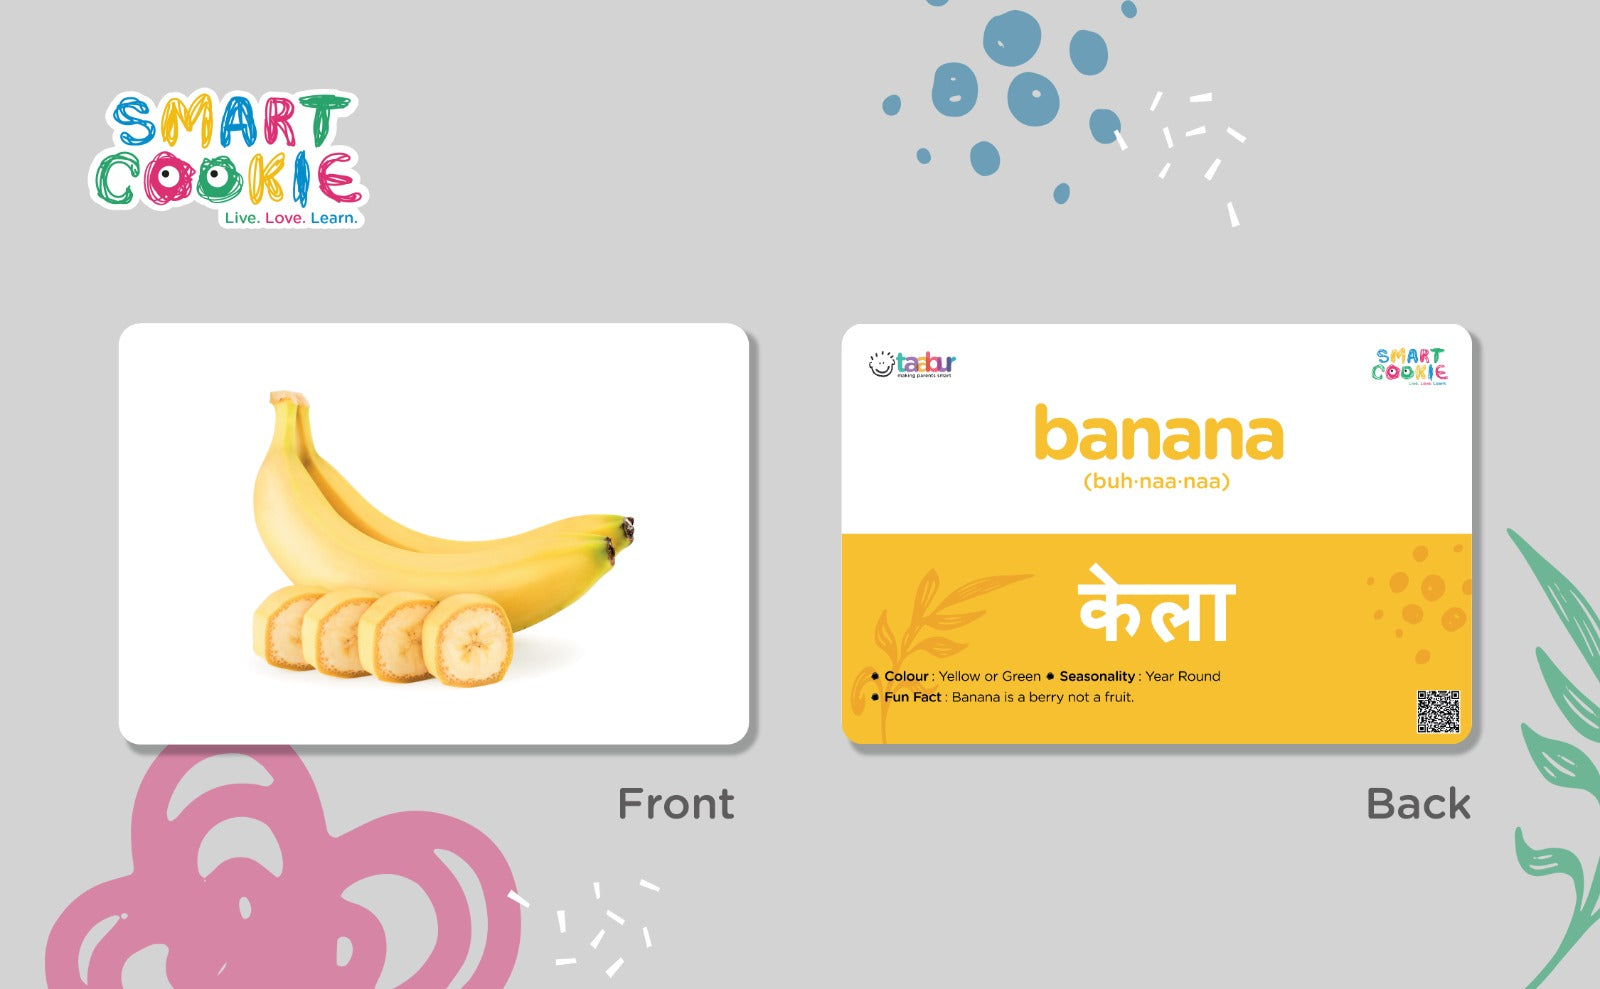 Fruits - Interactive Flashcards for Children (25 Cards) - for Kids Aged 2 to 4 Years Old